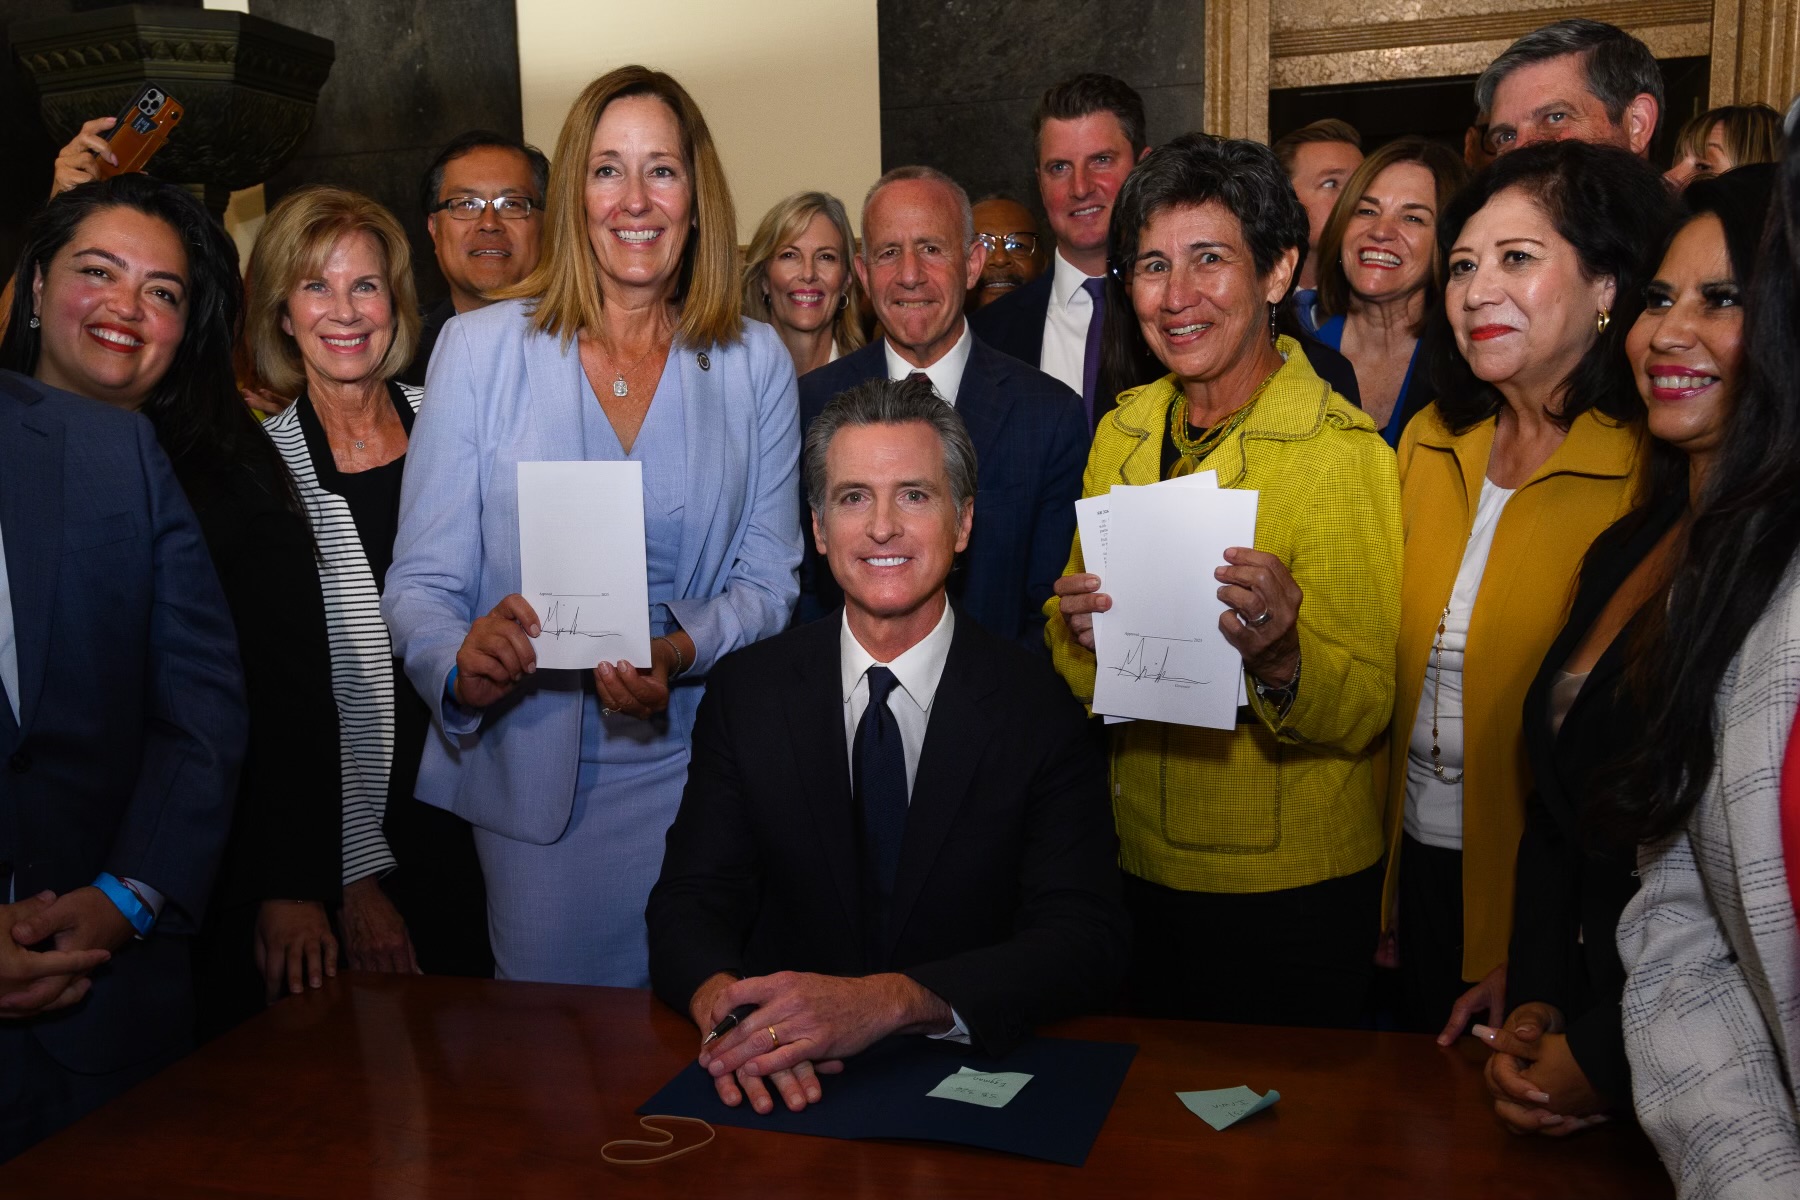 Governor Newsom with Assemblymember Irwin and Senator Eggman after signing AB 531 and SB 326